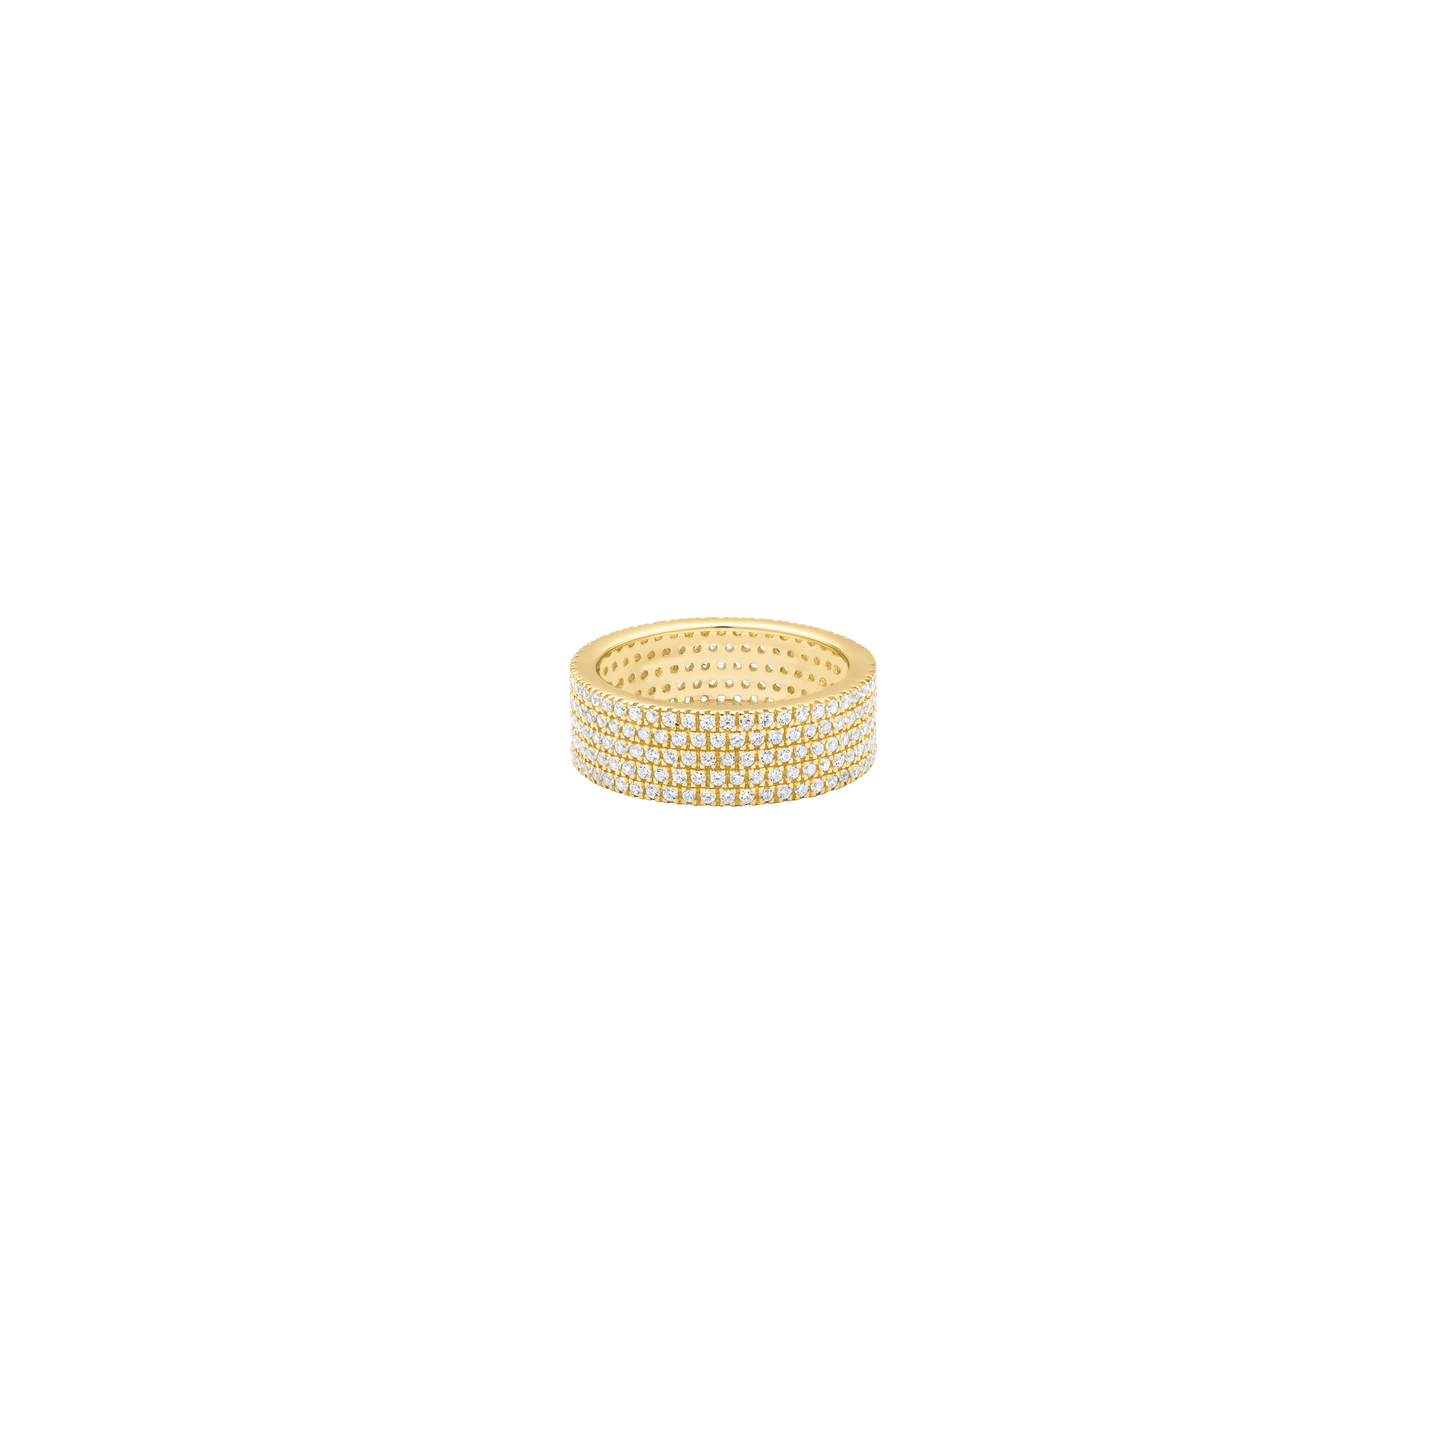 5 Band Paved Eternity Ring - 14K Yellow Gold Rings 14K Solid Gold US 4 